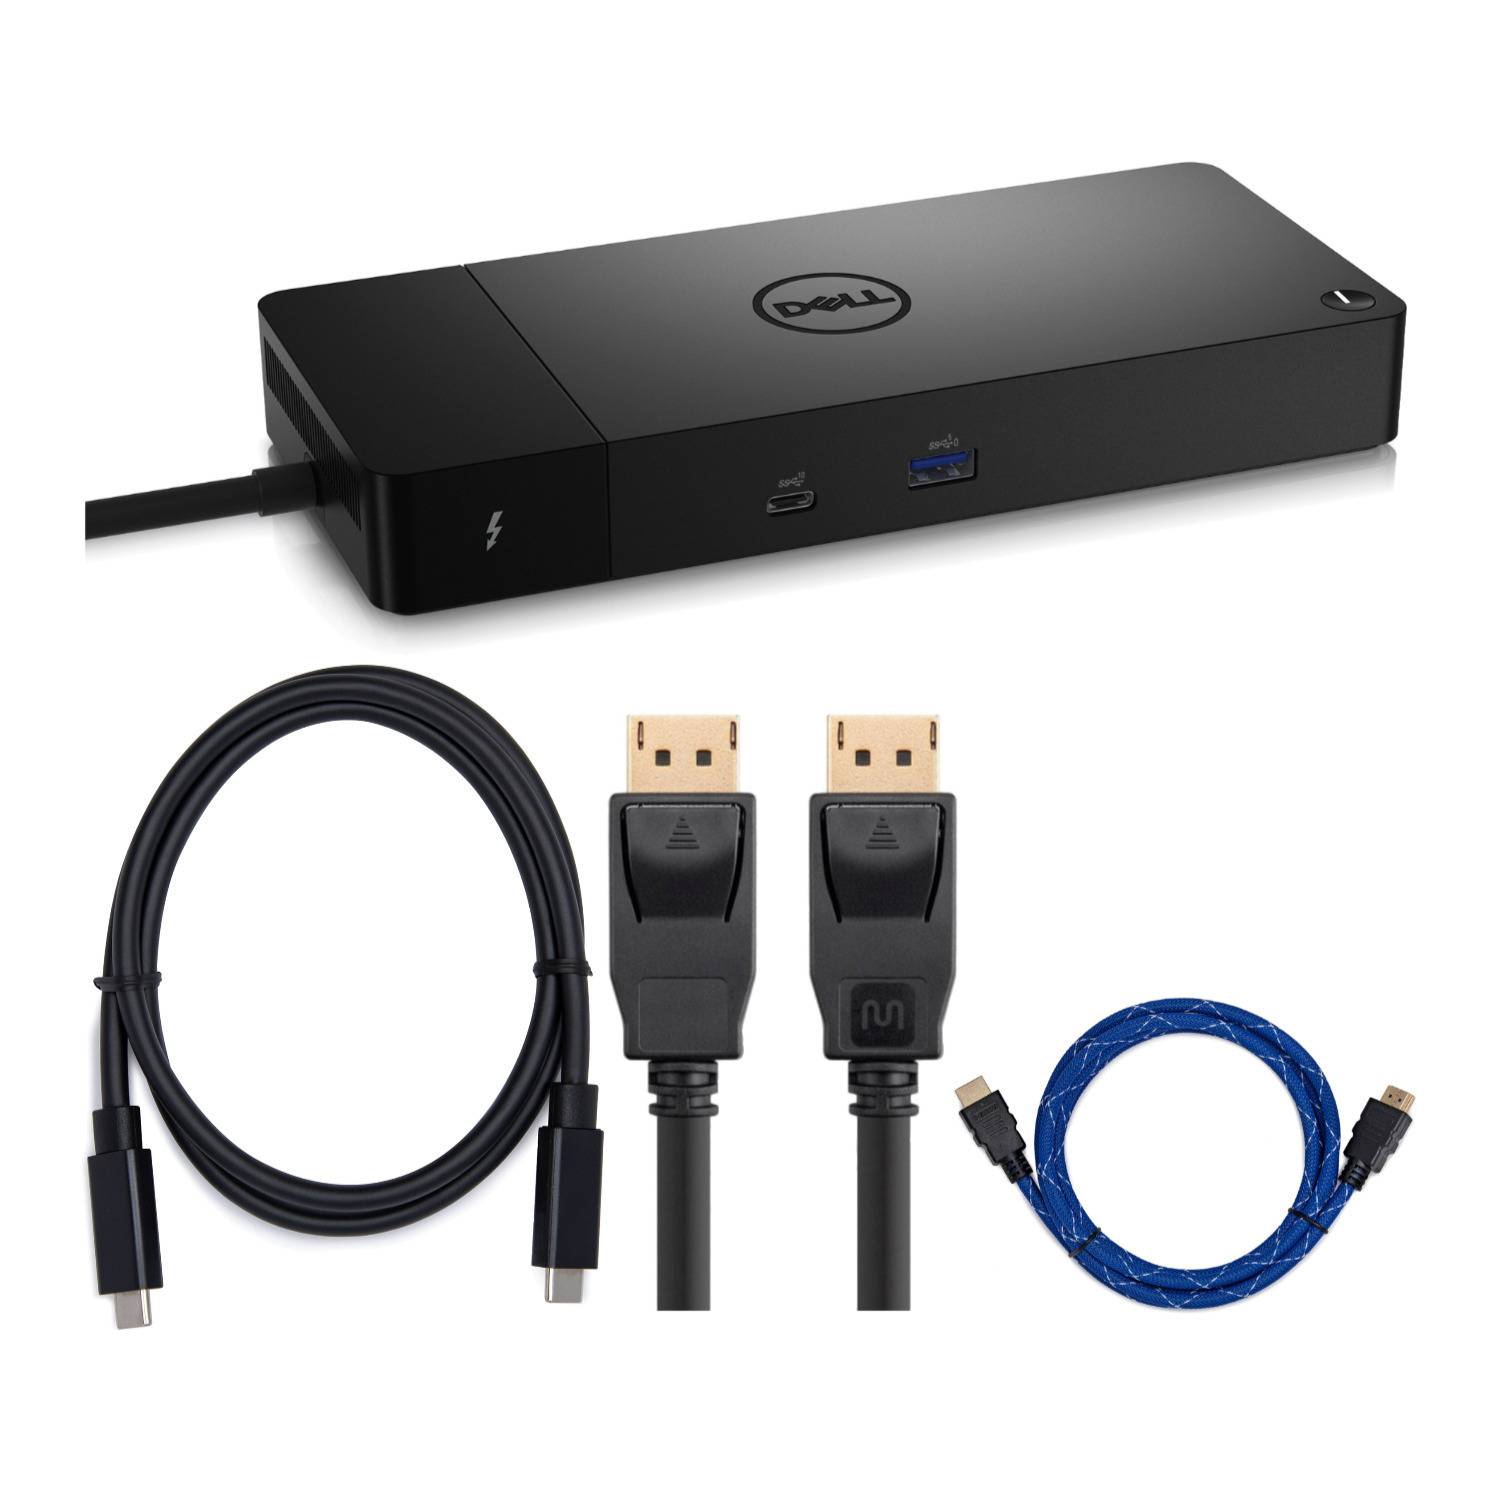 Dell WD22TB4 Thunderbolt 4 Dock with Knox HDMI, DisplayPort and Thunderbolt Cables Bundle